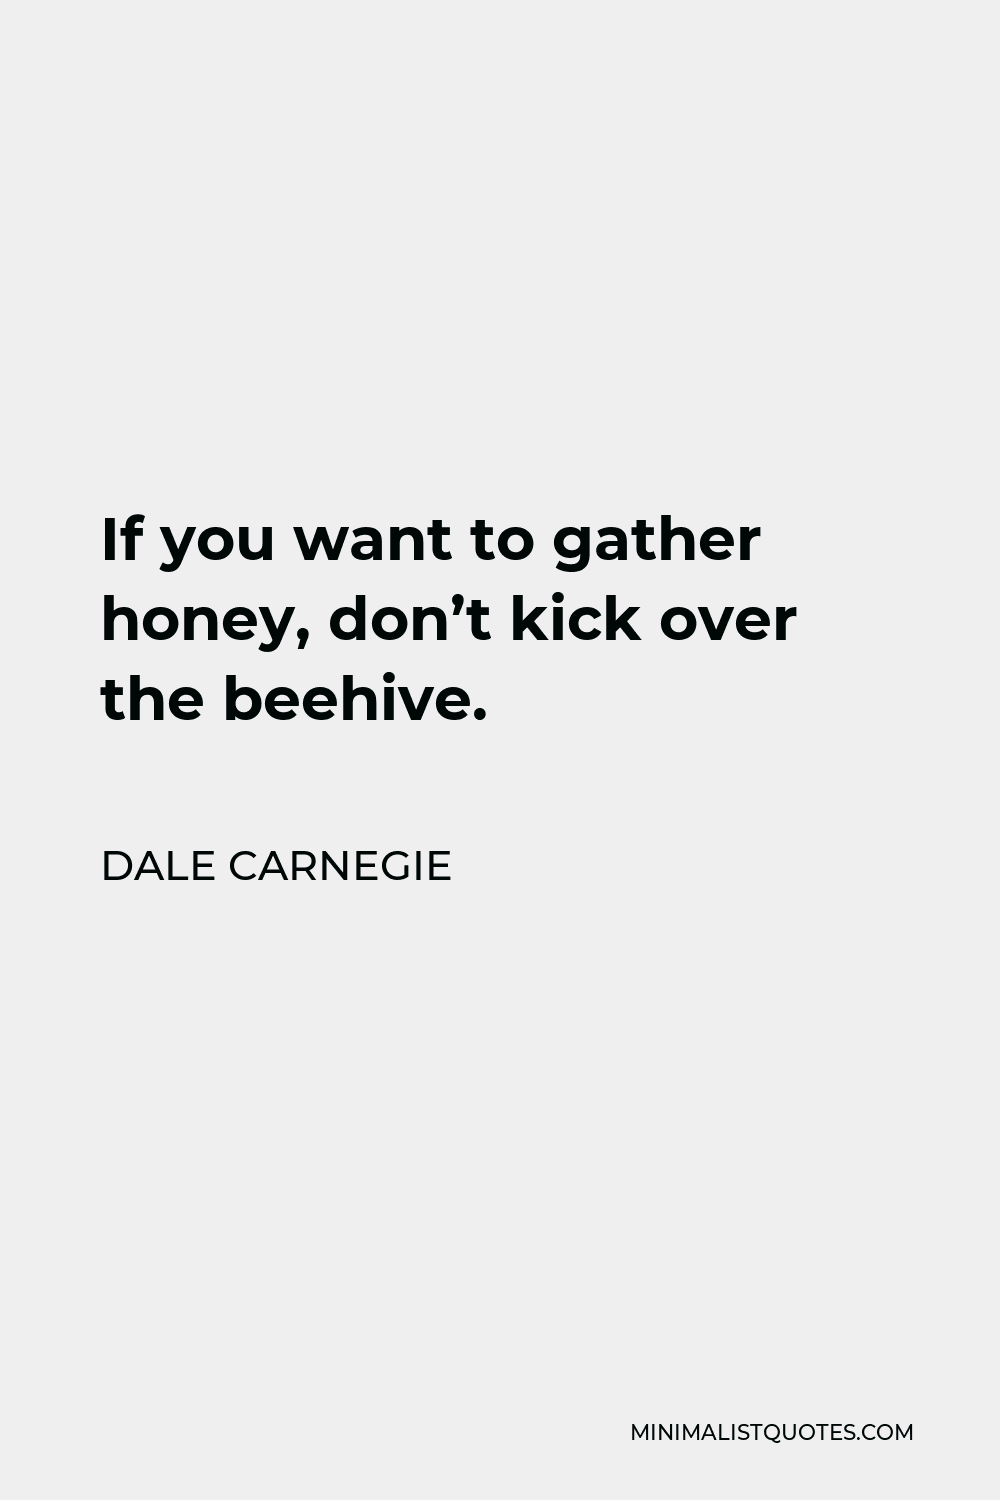 Dale Carnegie Quote - If you want to gather honey, don’t kick over the beehive.